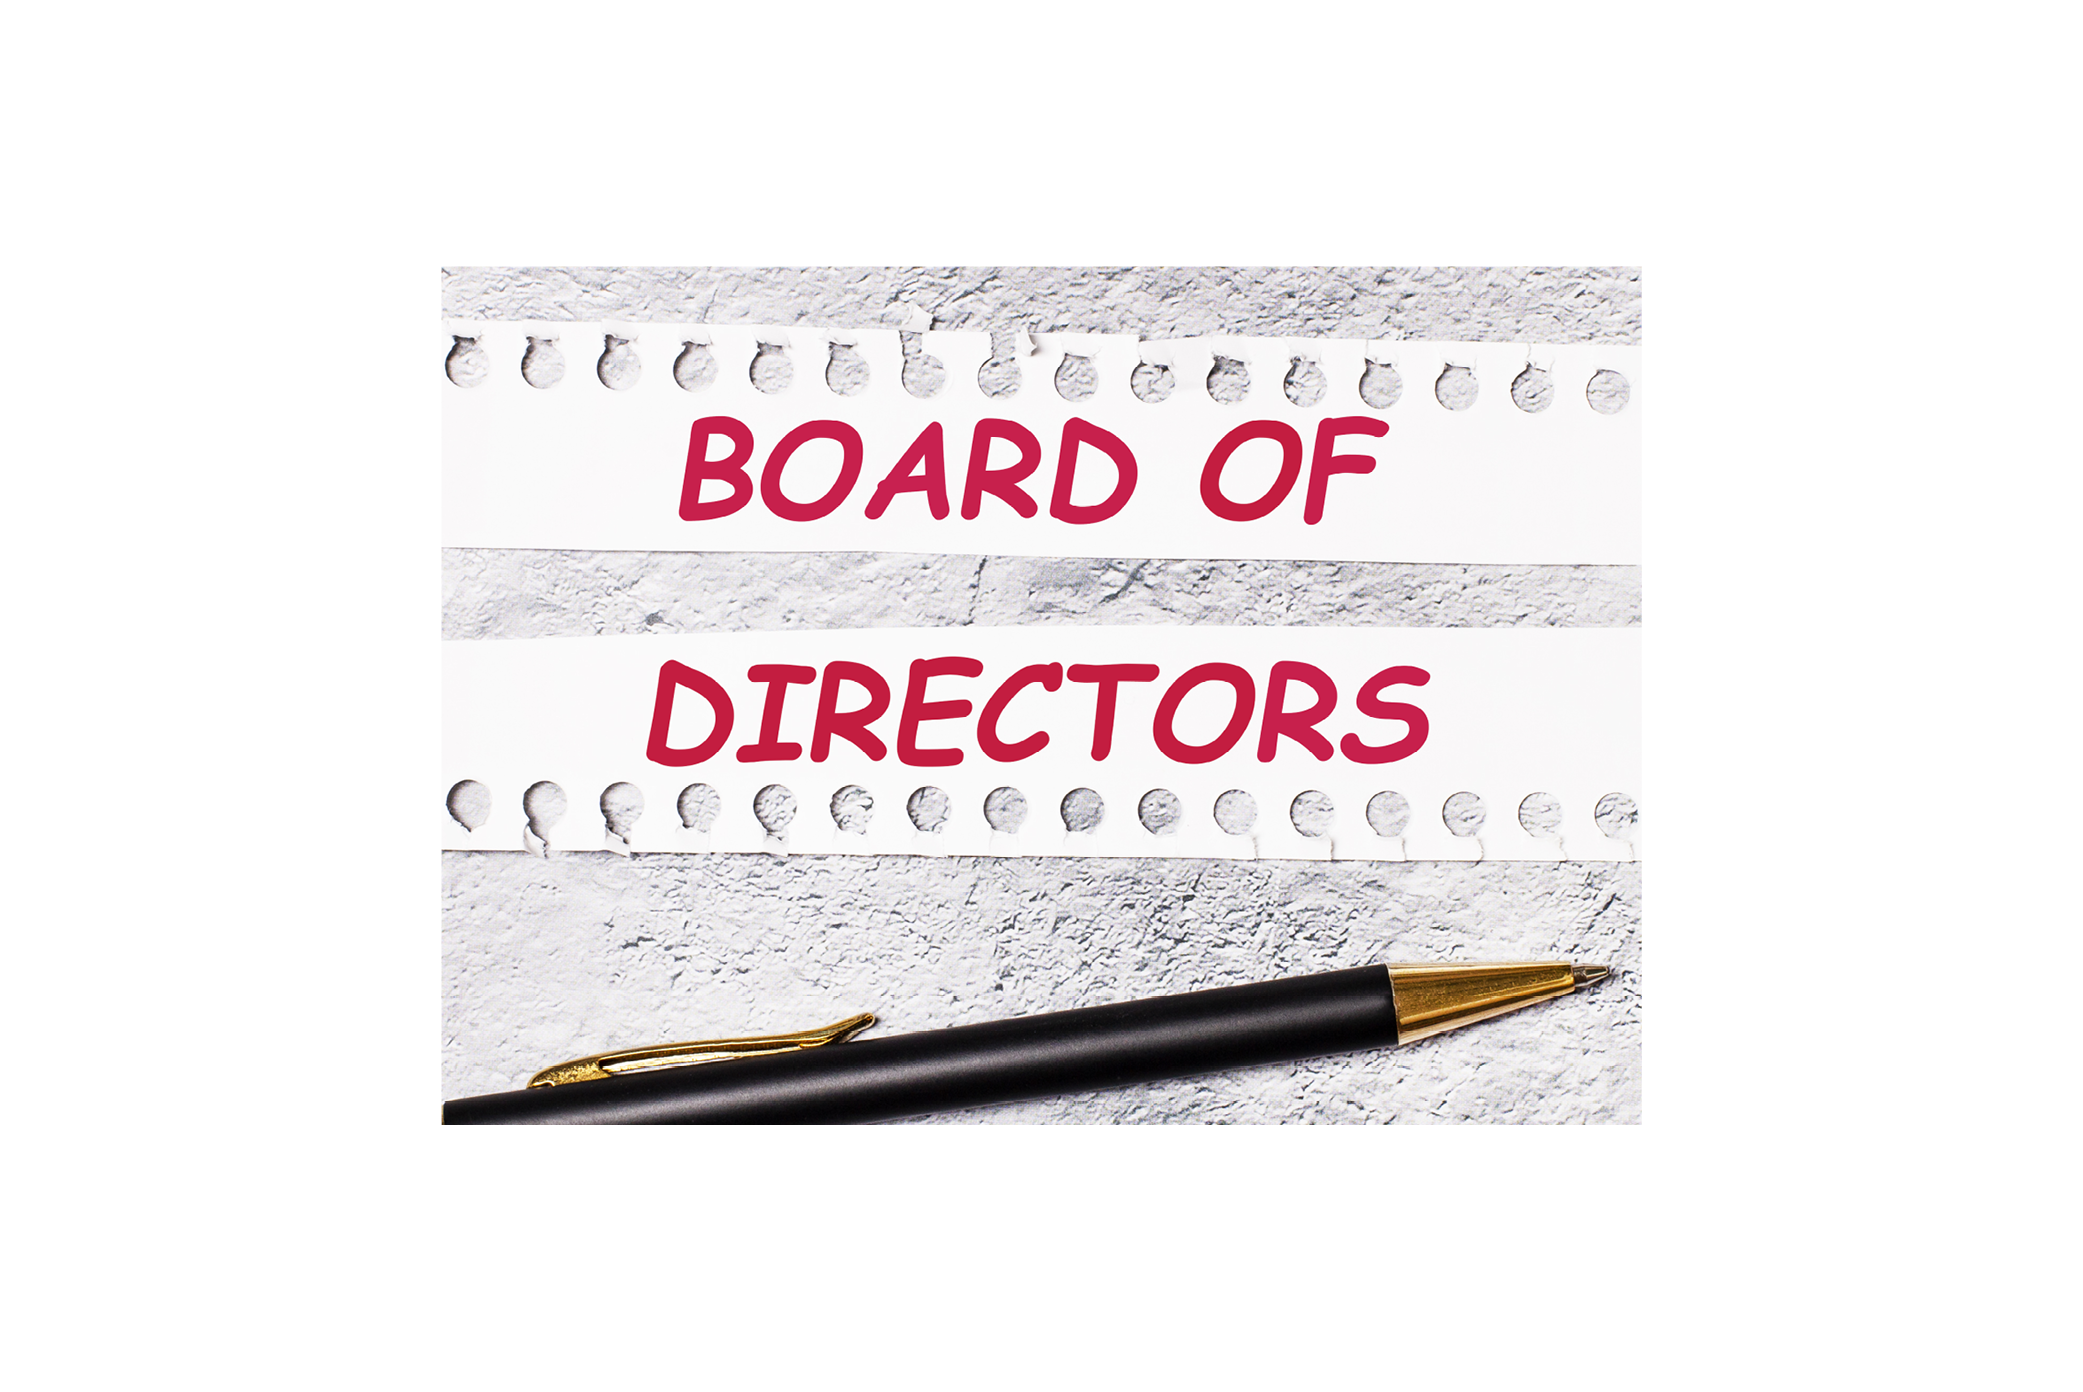 How to Attract Qualified Professionals for Your Board of Directors